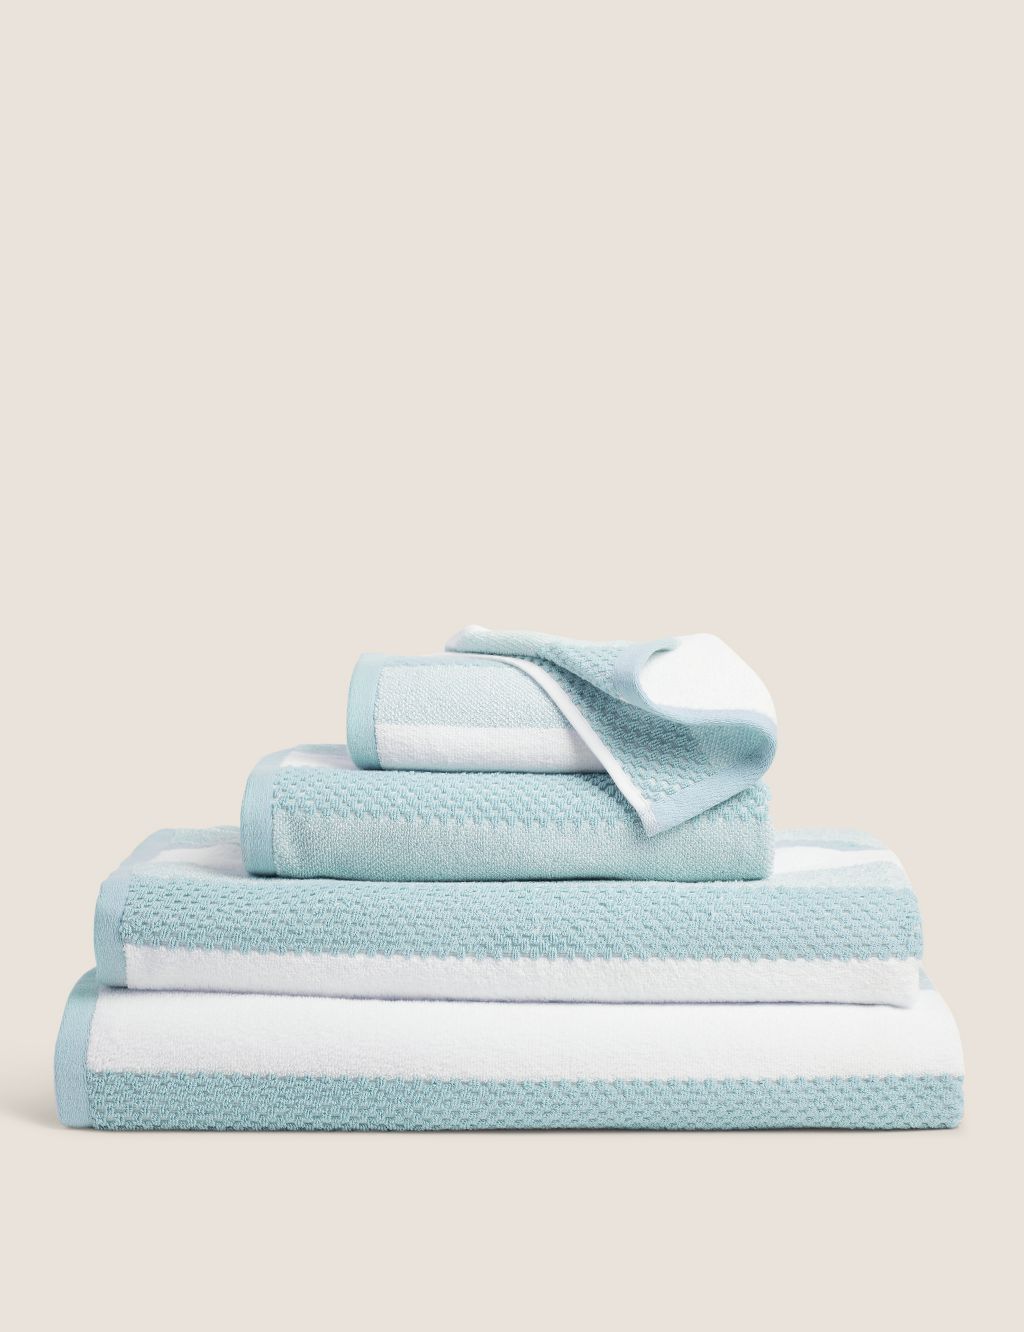 Pure Cotton Striped Textured Towel image 2